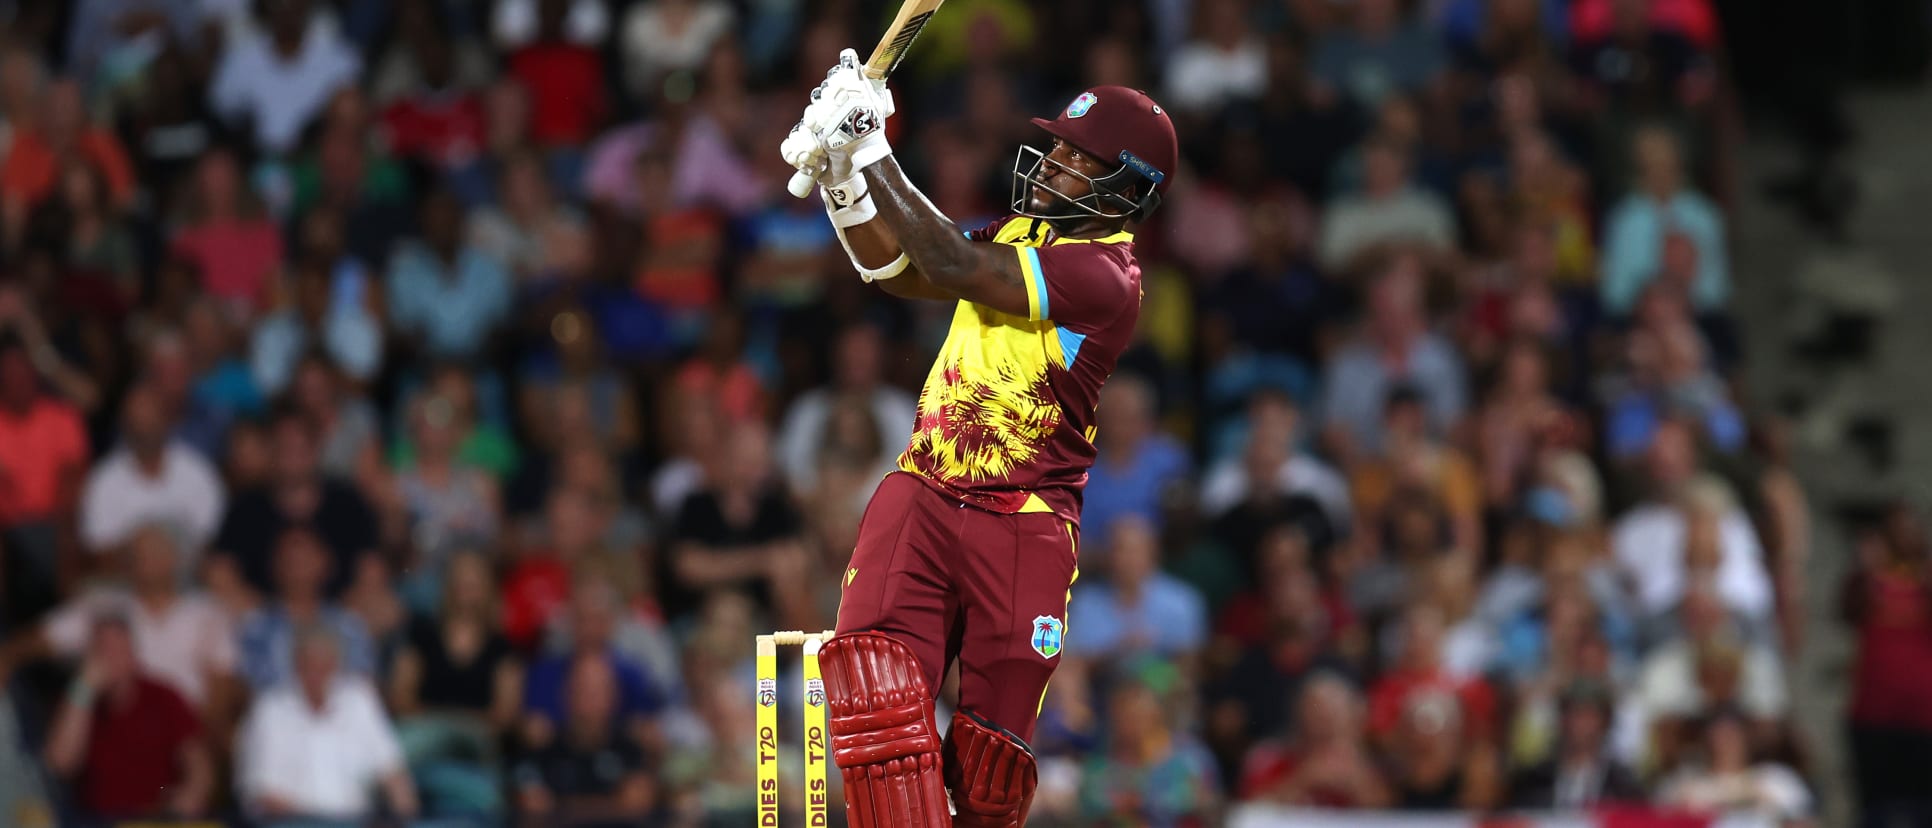 West Indies storm to fourth spot in rankings ahead of Men’s T20 World